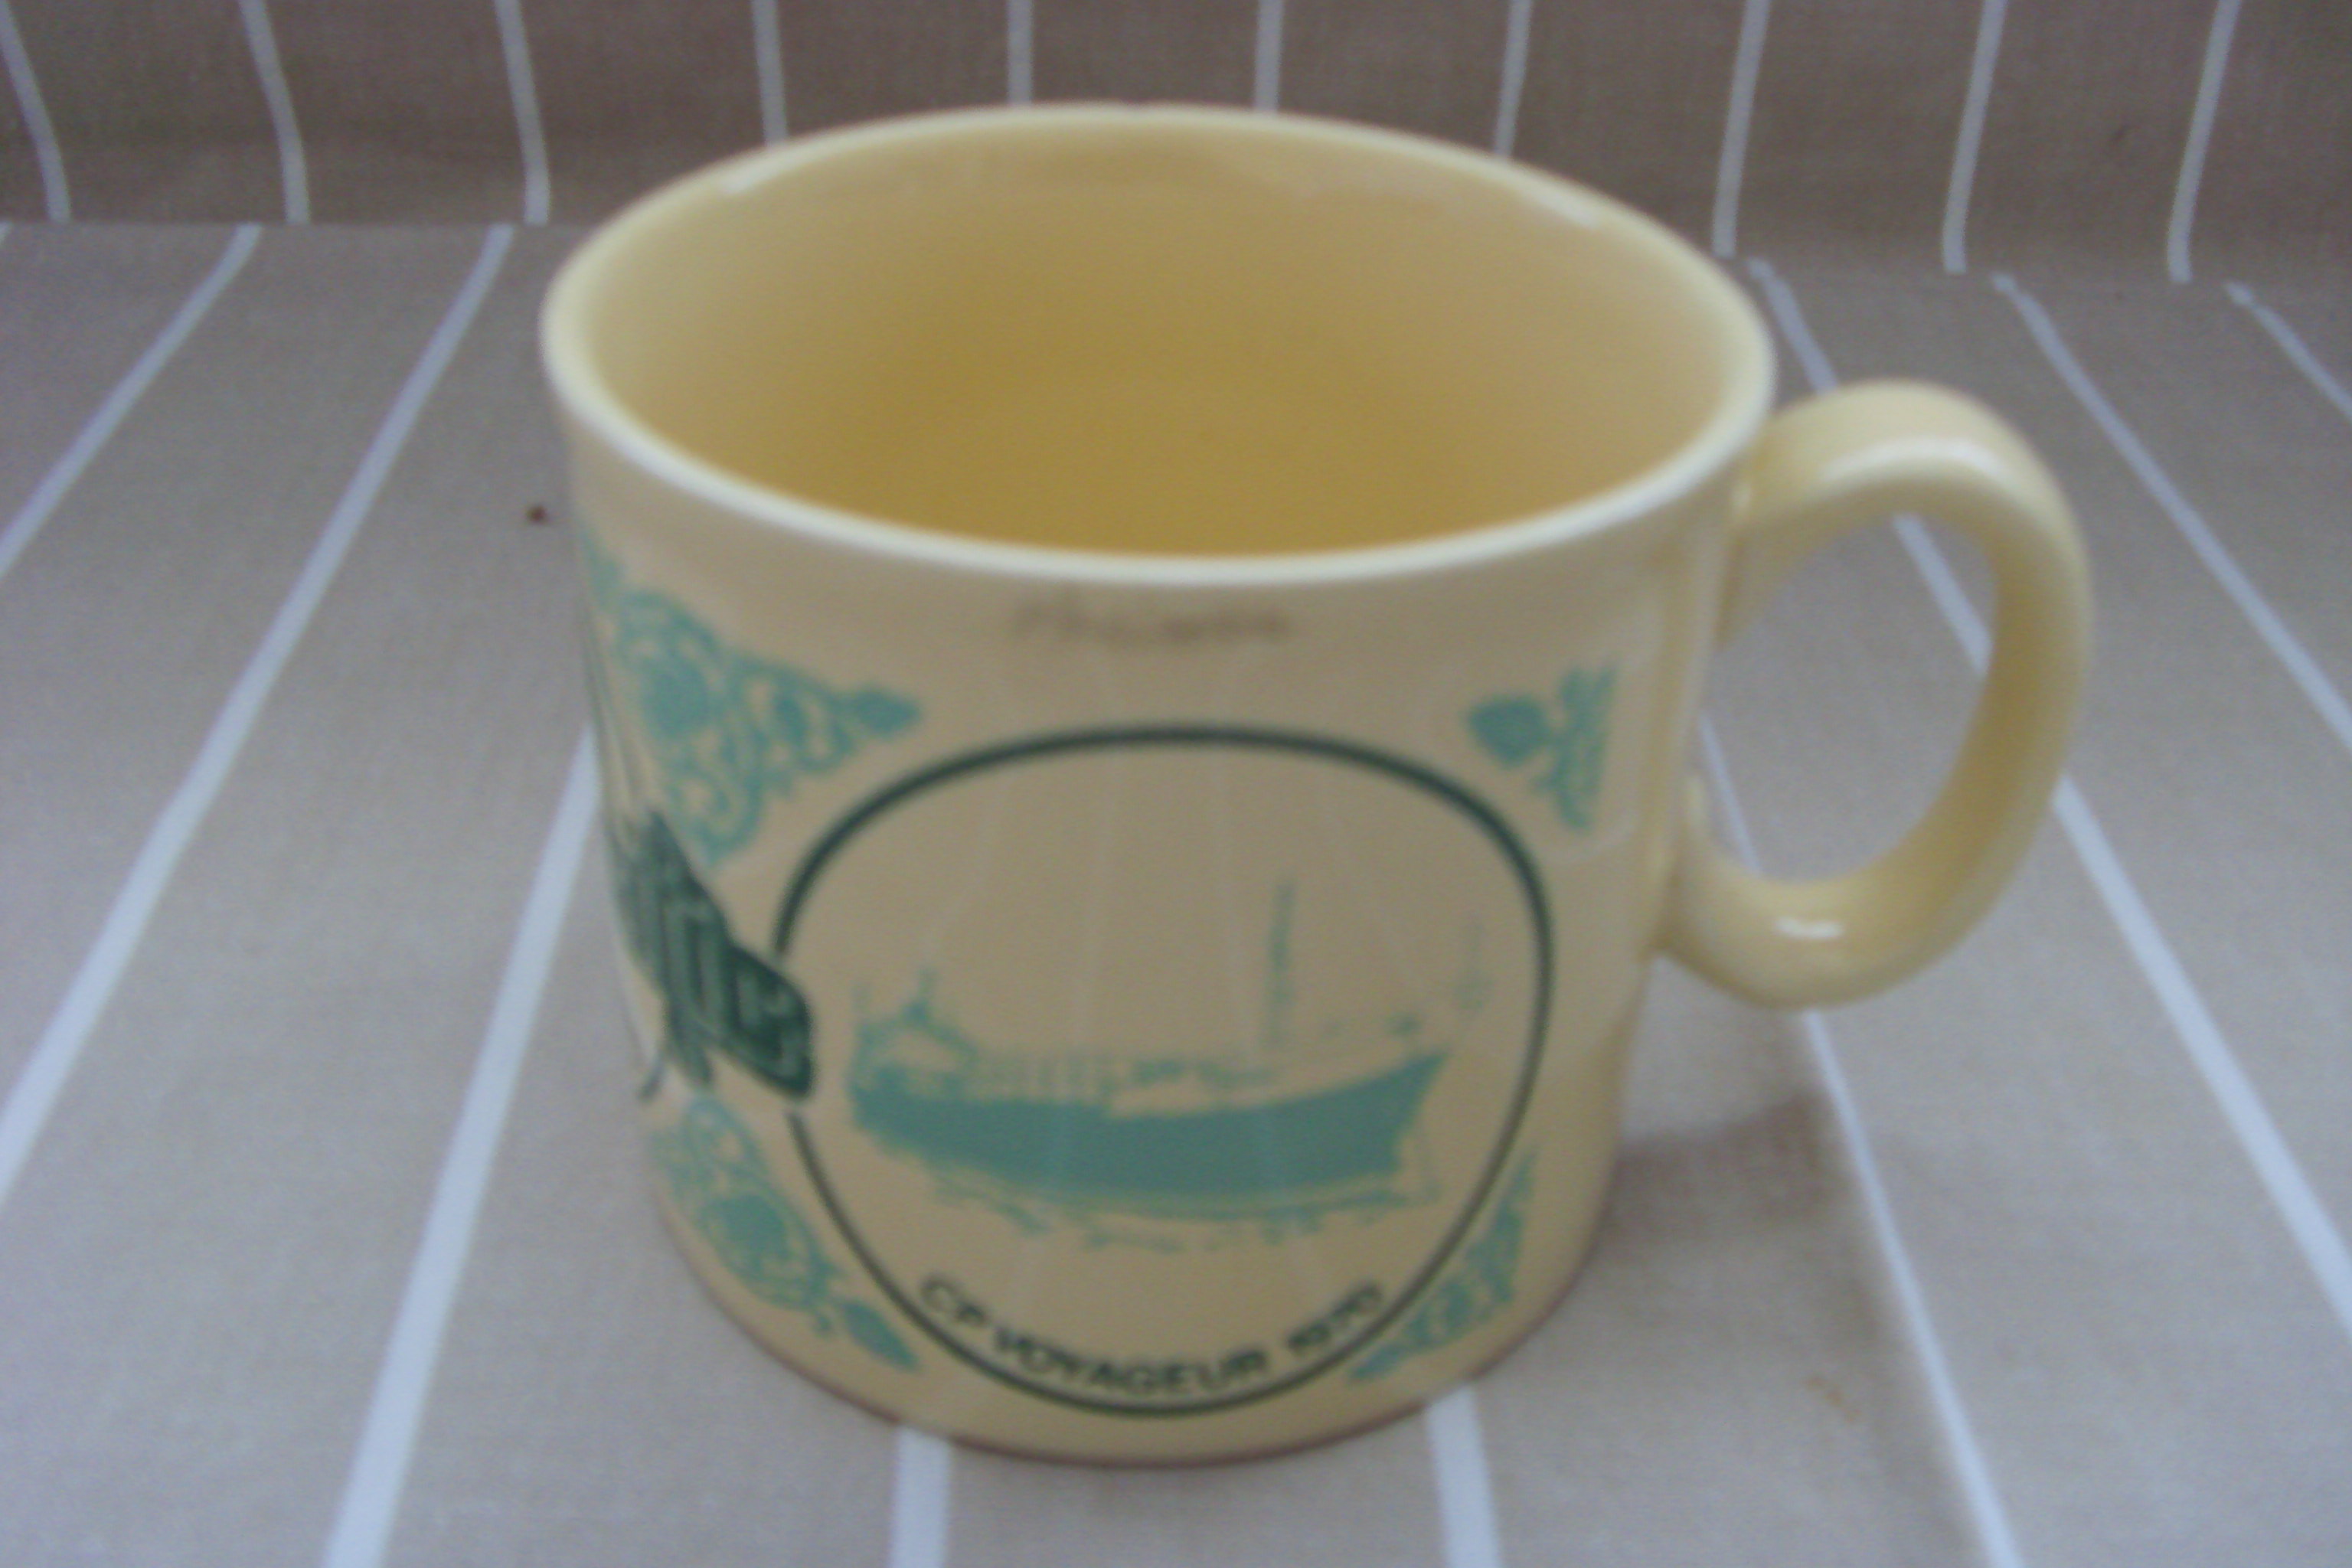 SOUVENIR MUG FROM THE VESSEL CP VOYAGEUR OF THE CANADIAN PACIFIC STEAMSHIPS COMPANY